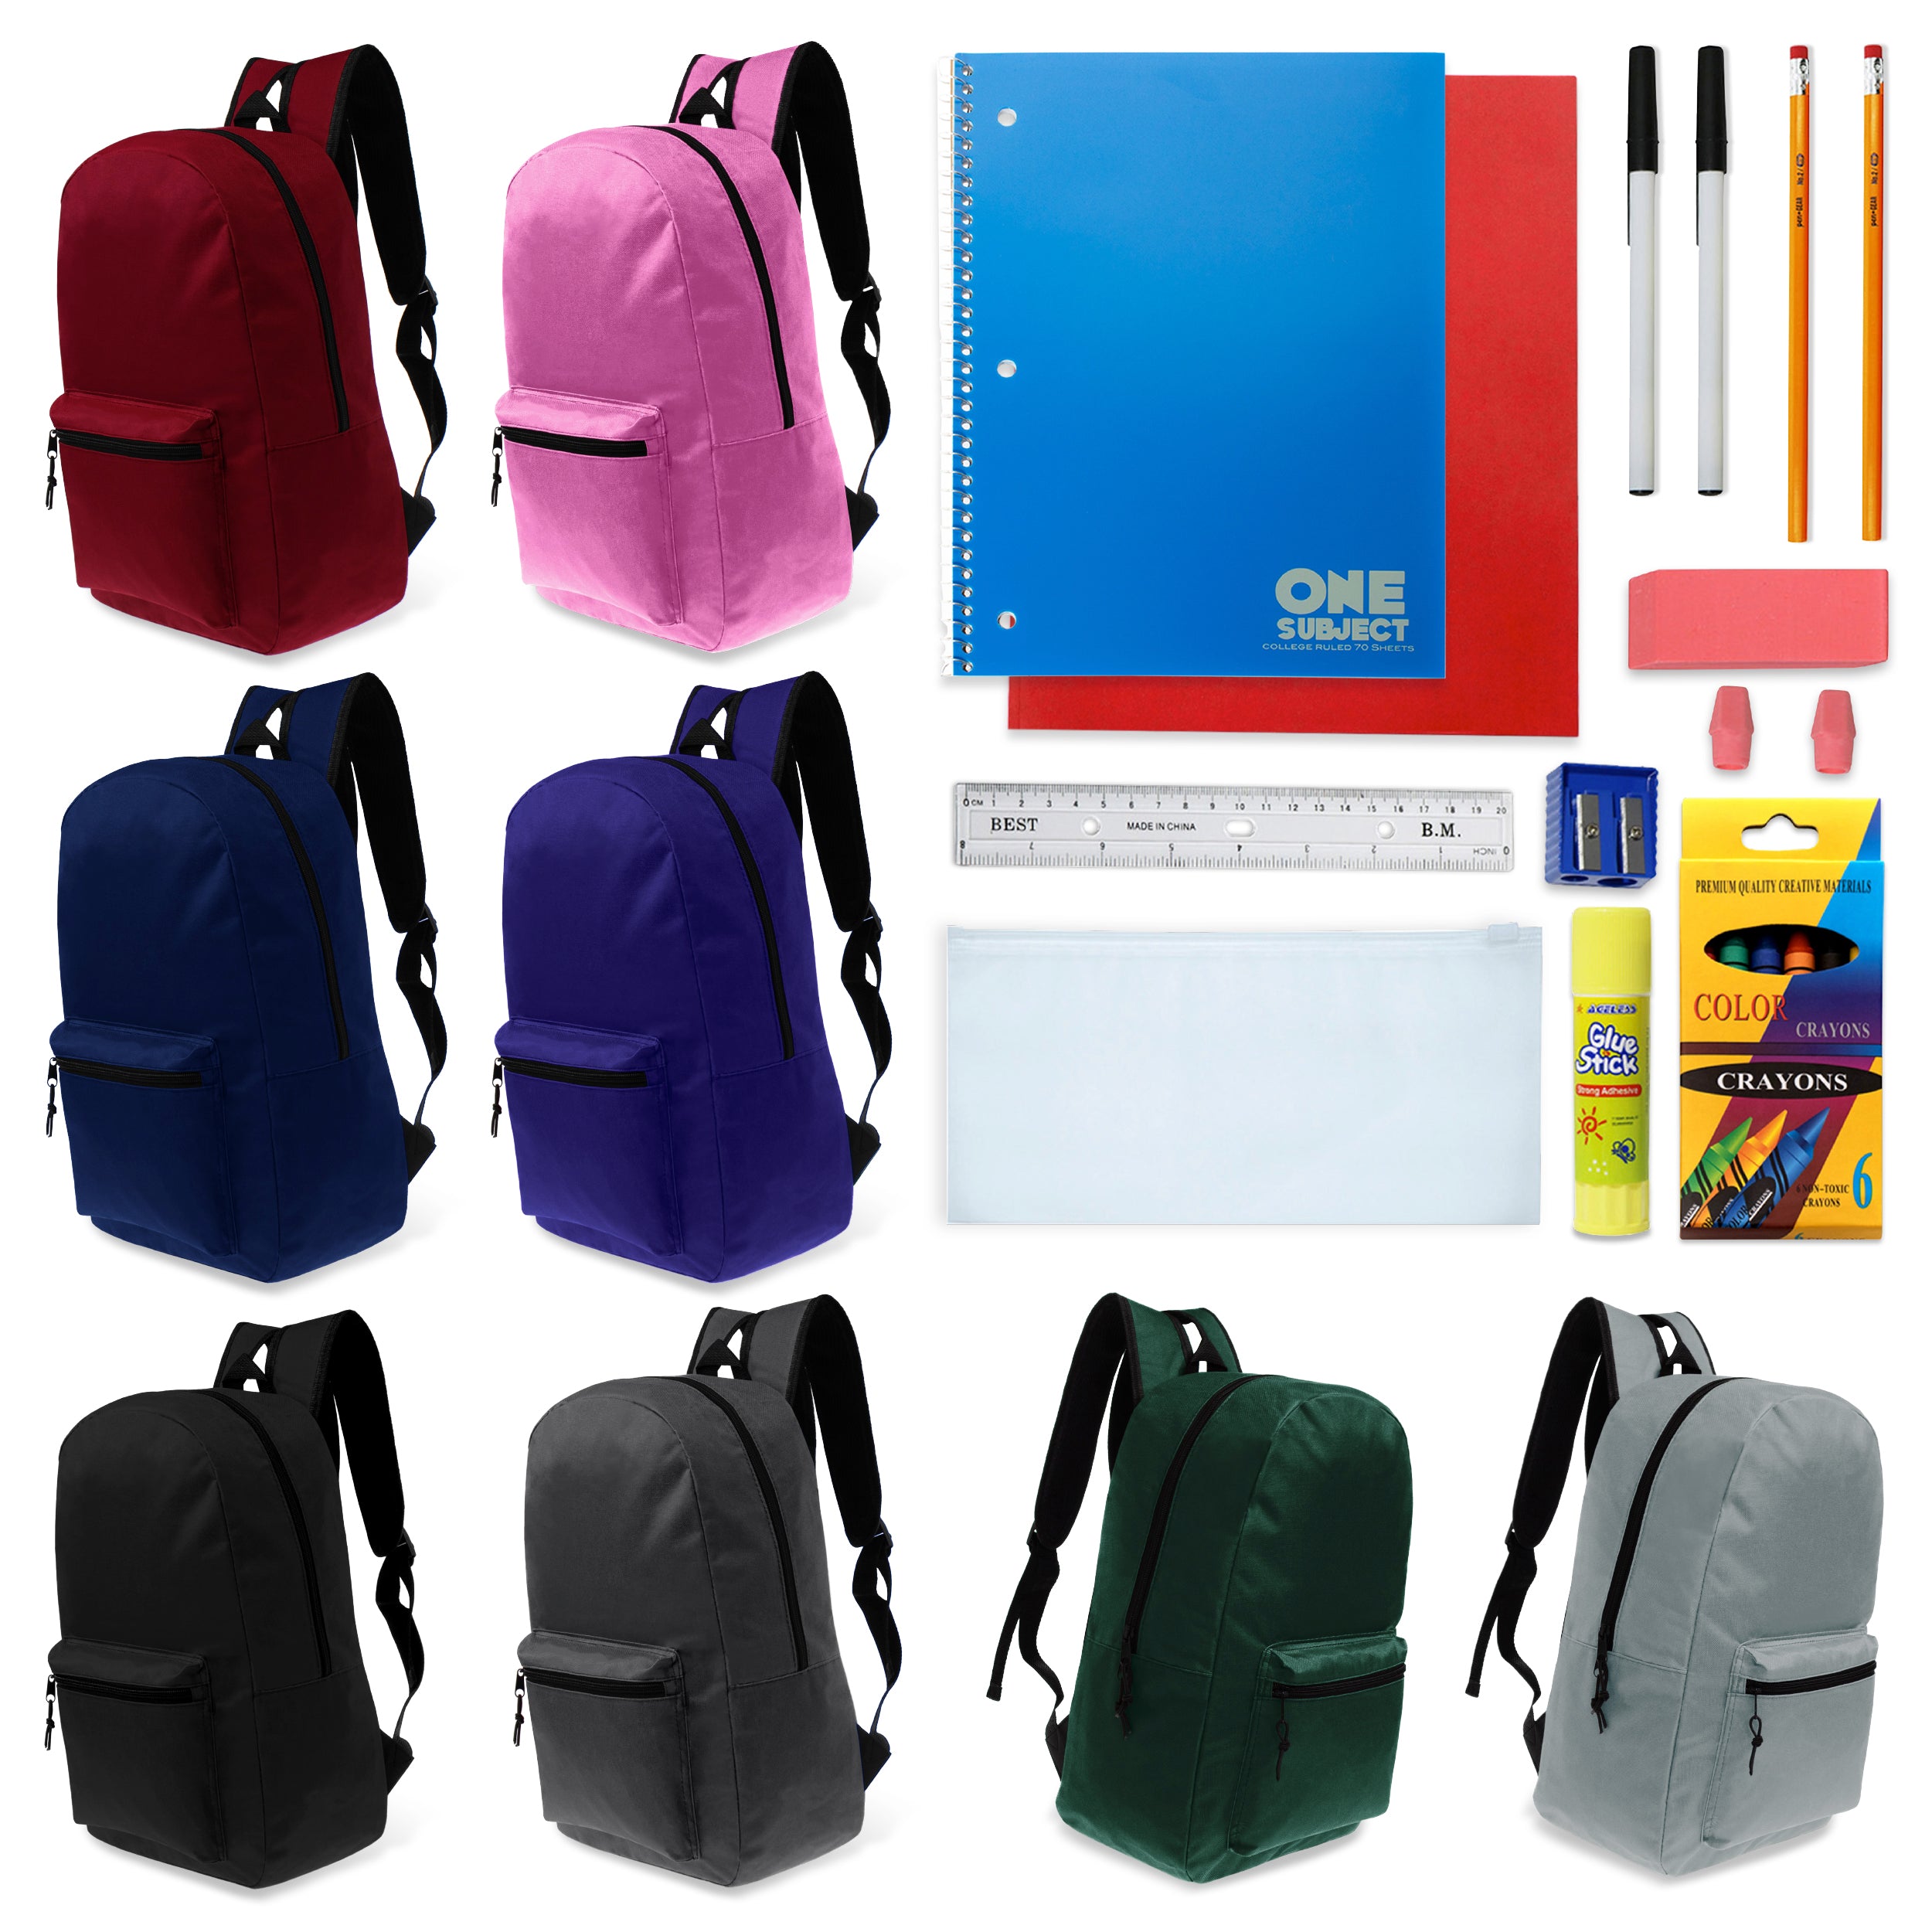 17-Inch Wholesale Backpacks School Supply - Kits Case of 12